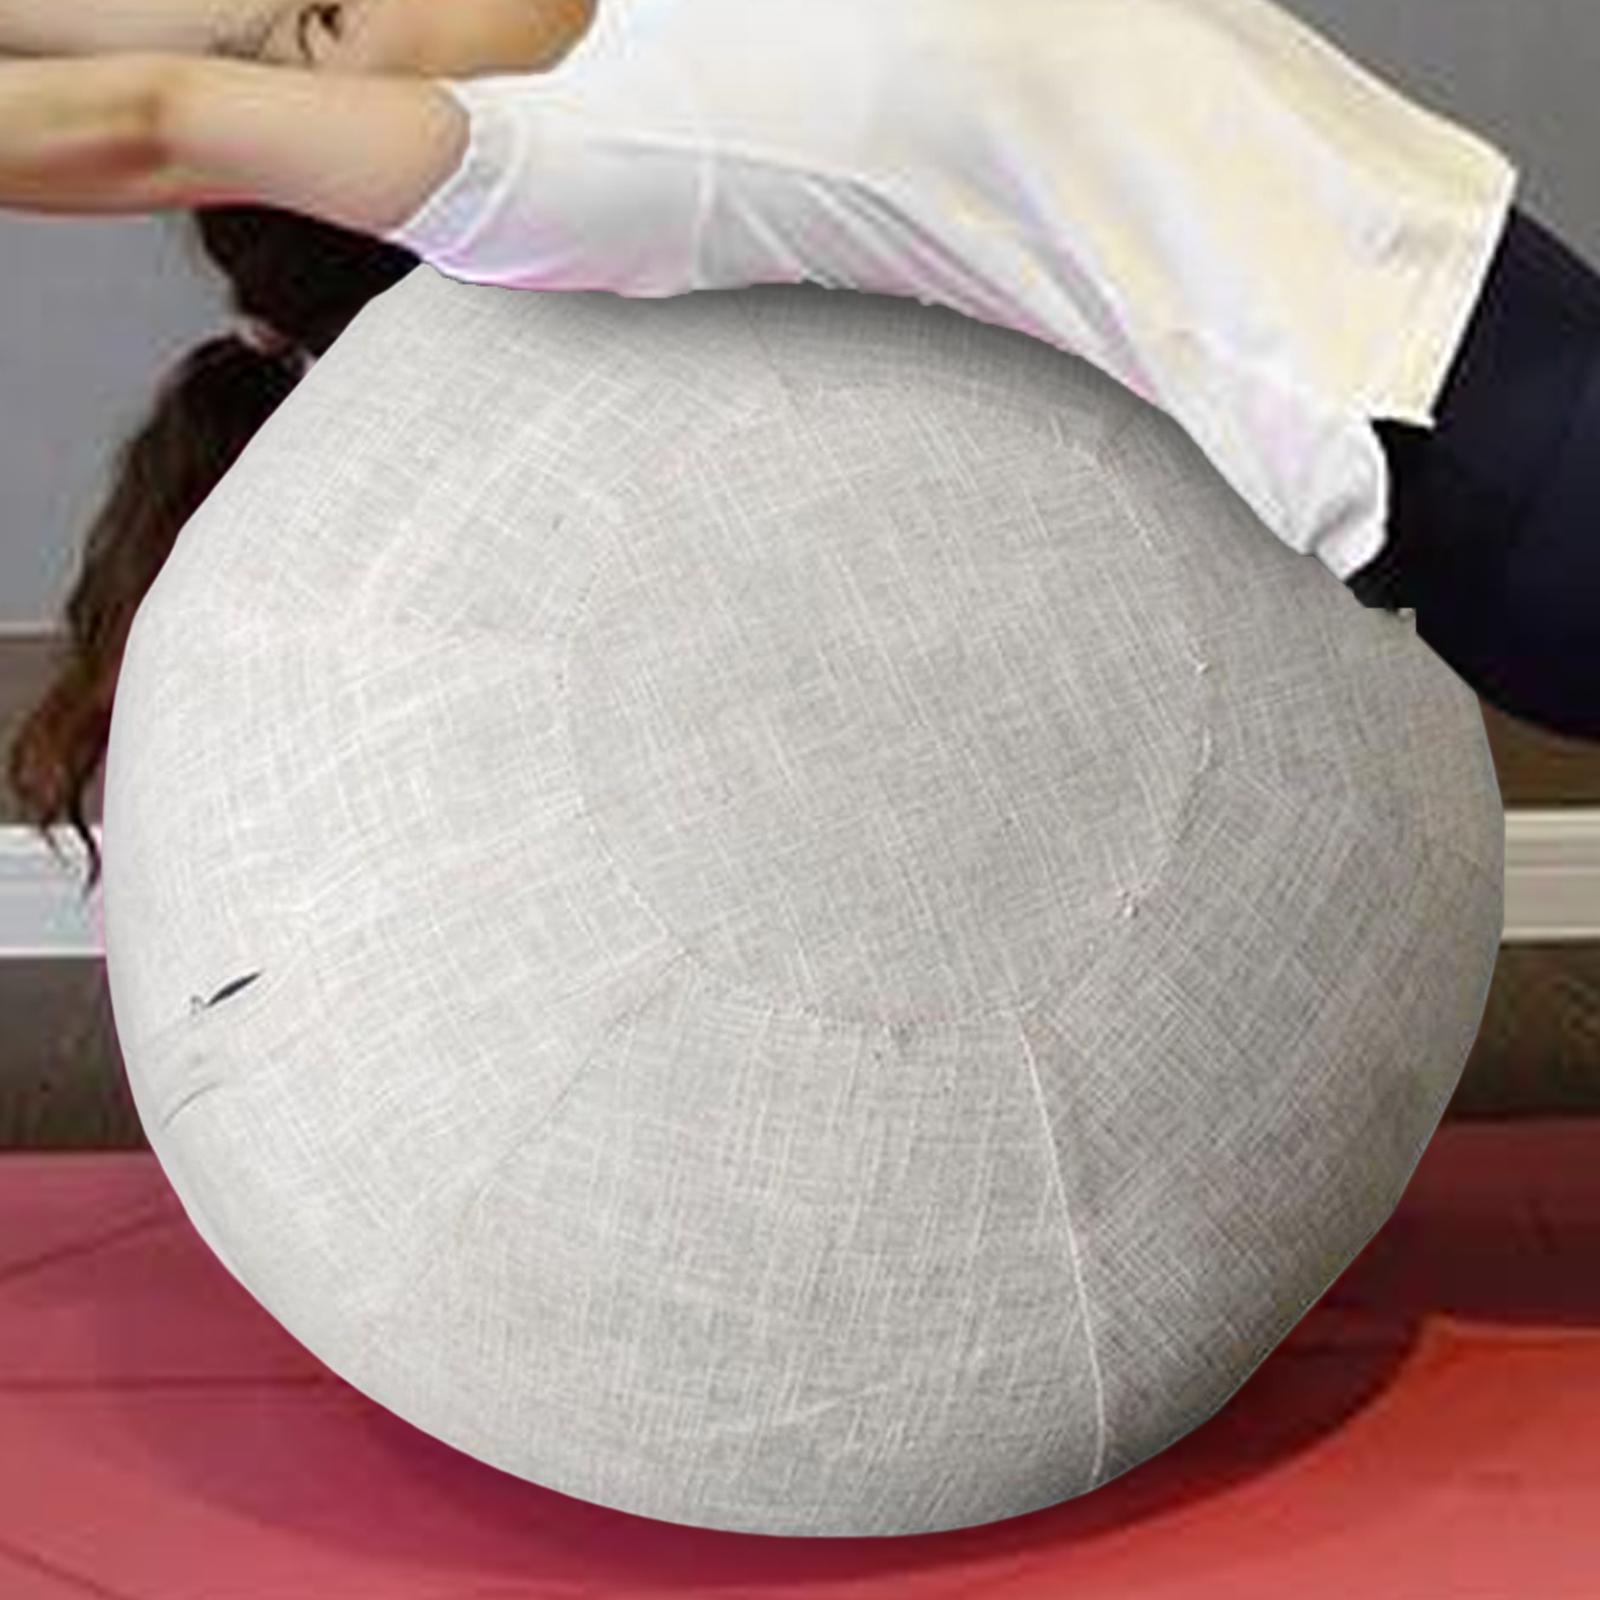 Pilates Yoga Ball Cover Foldable Stability Ball Durable Sitting Balls Cover